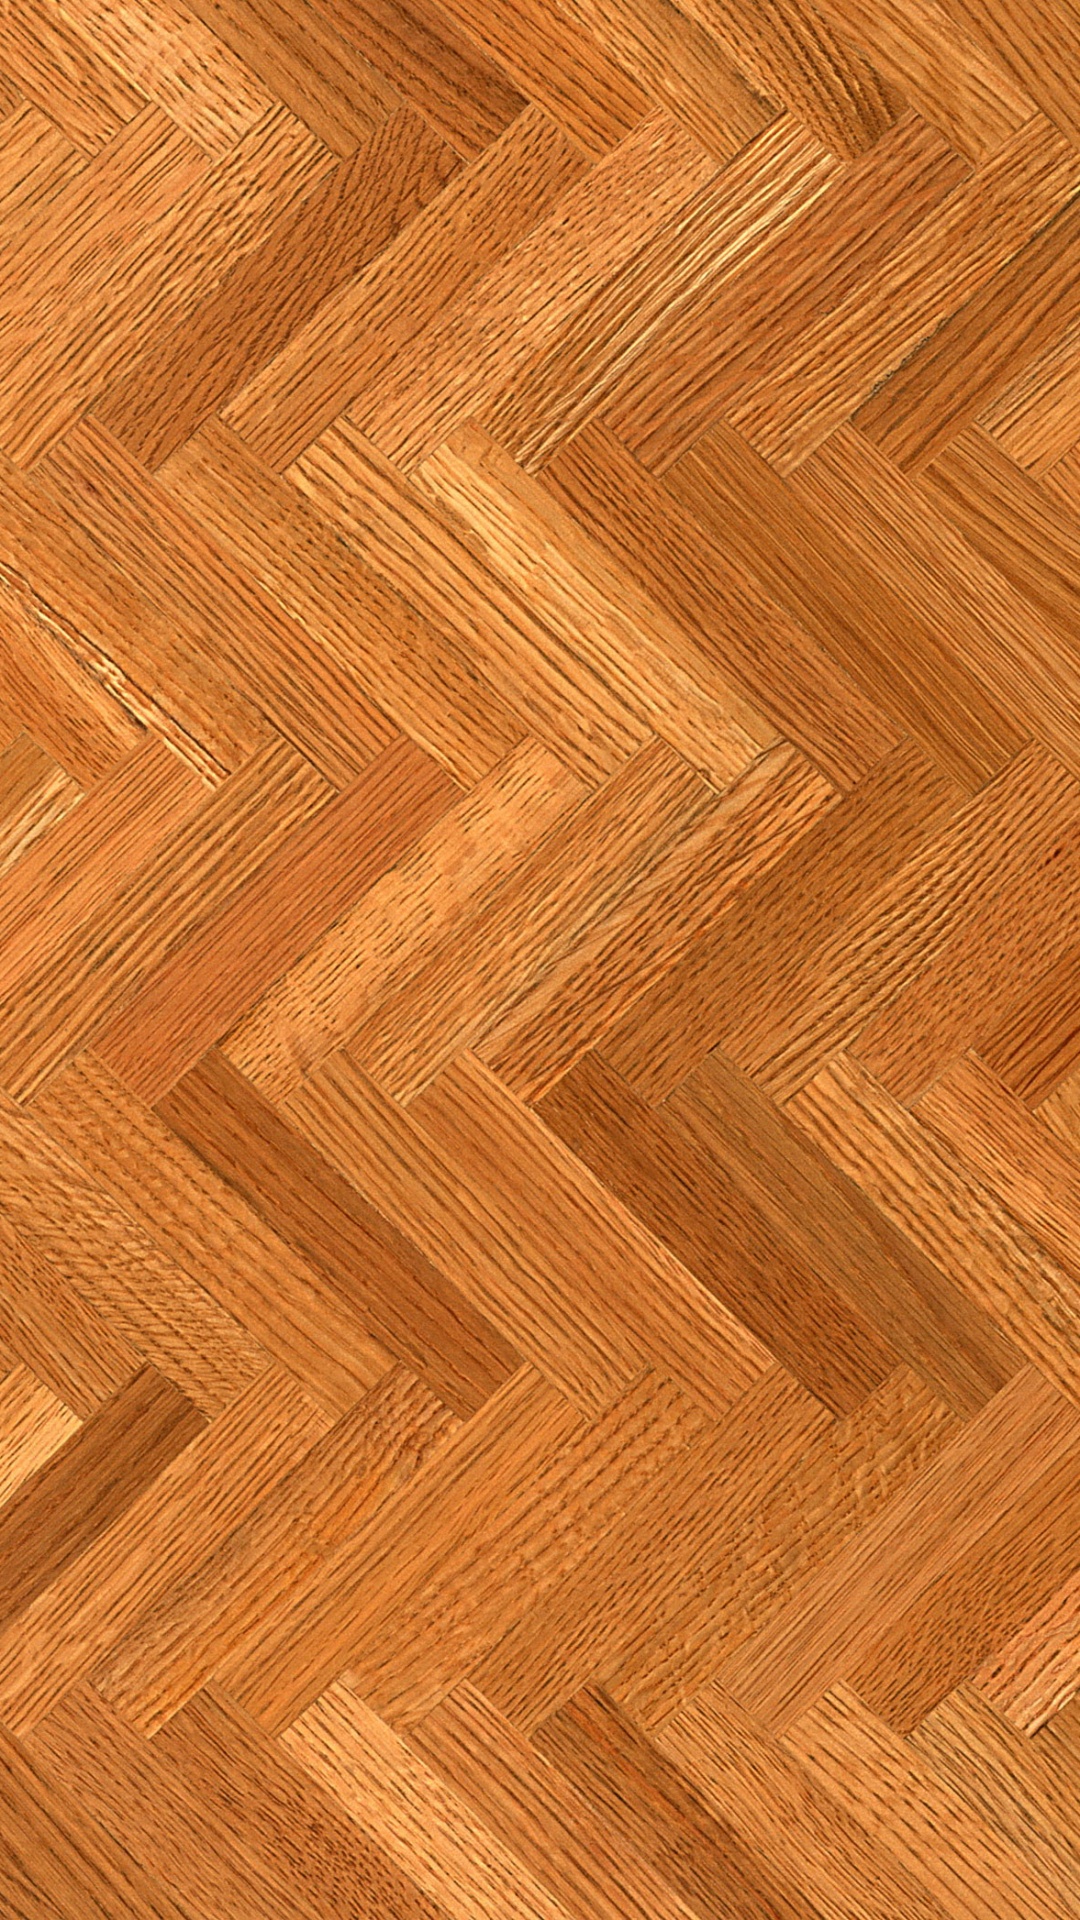 Brown and White Checkered Textile. Wallpaper in 1080x1920 Resolution